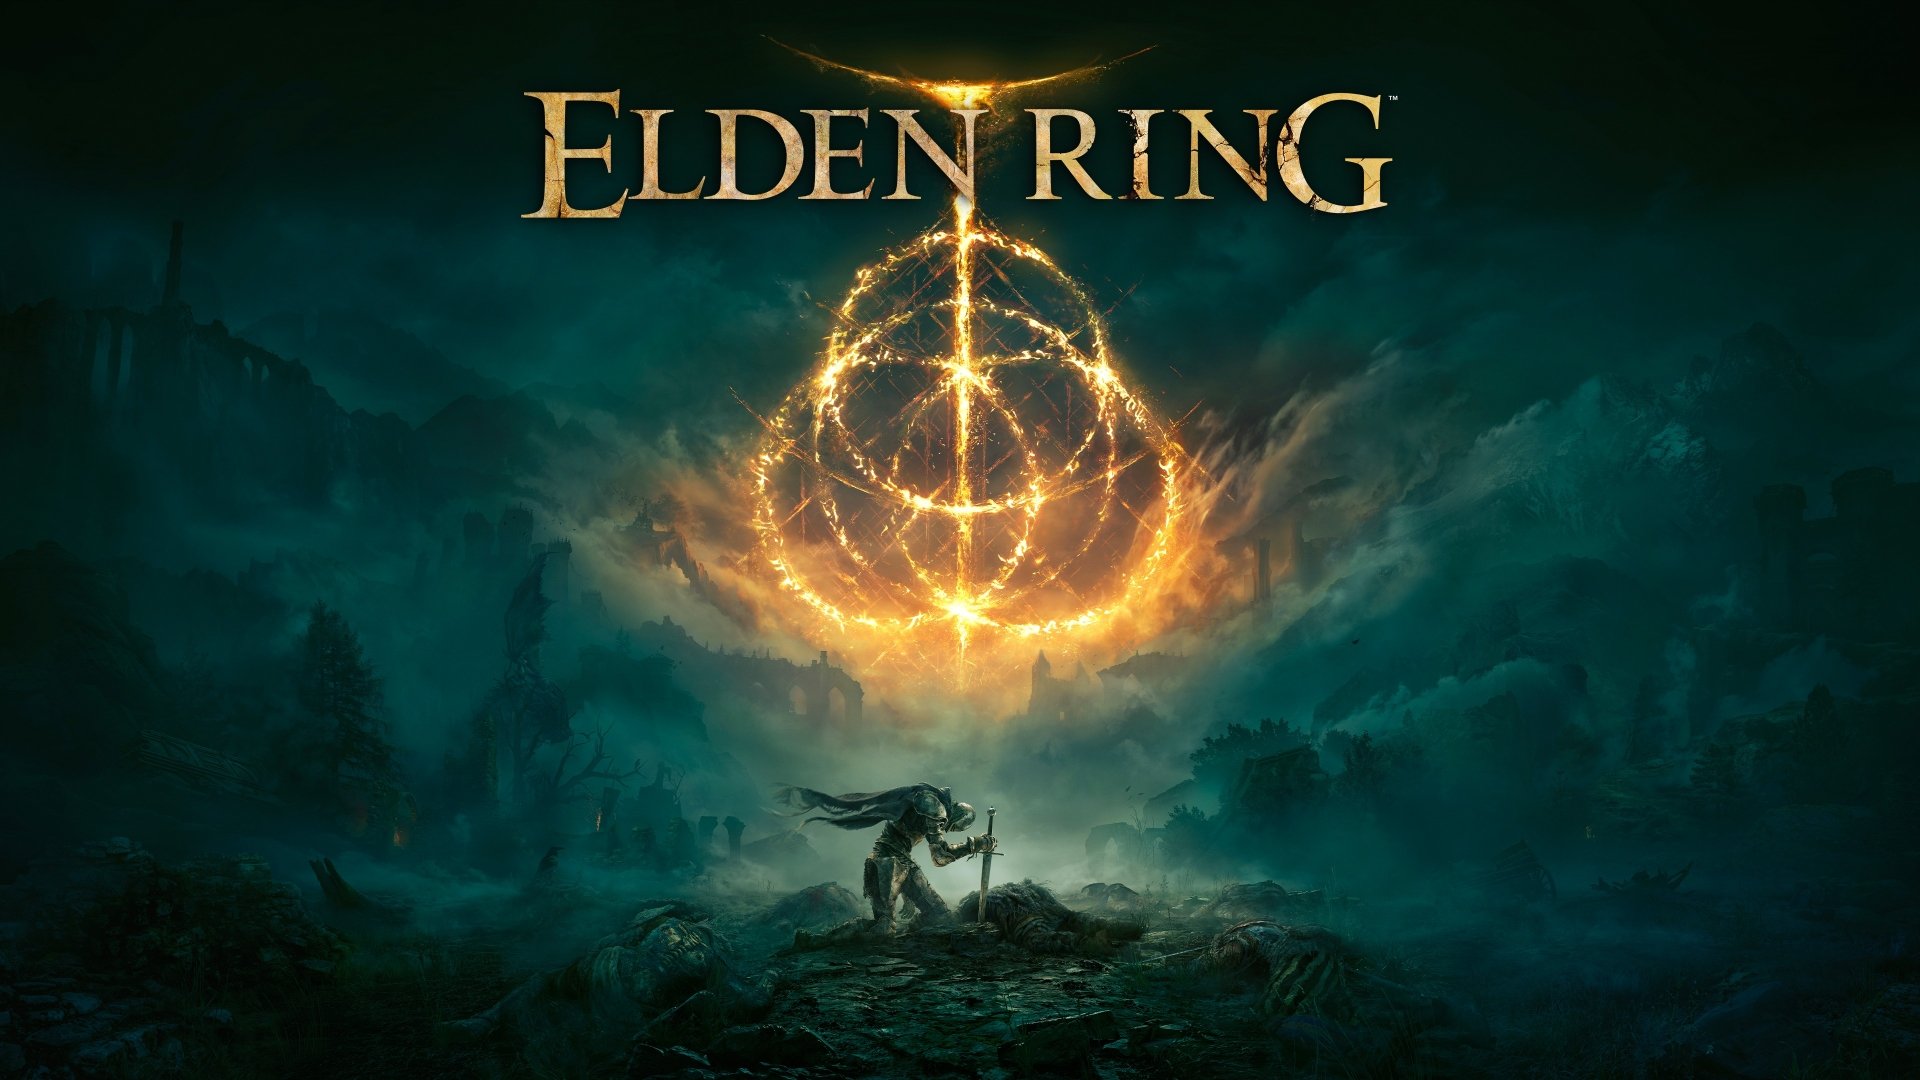 An image displaying the main cover of Elden Ring by FromSoftware